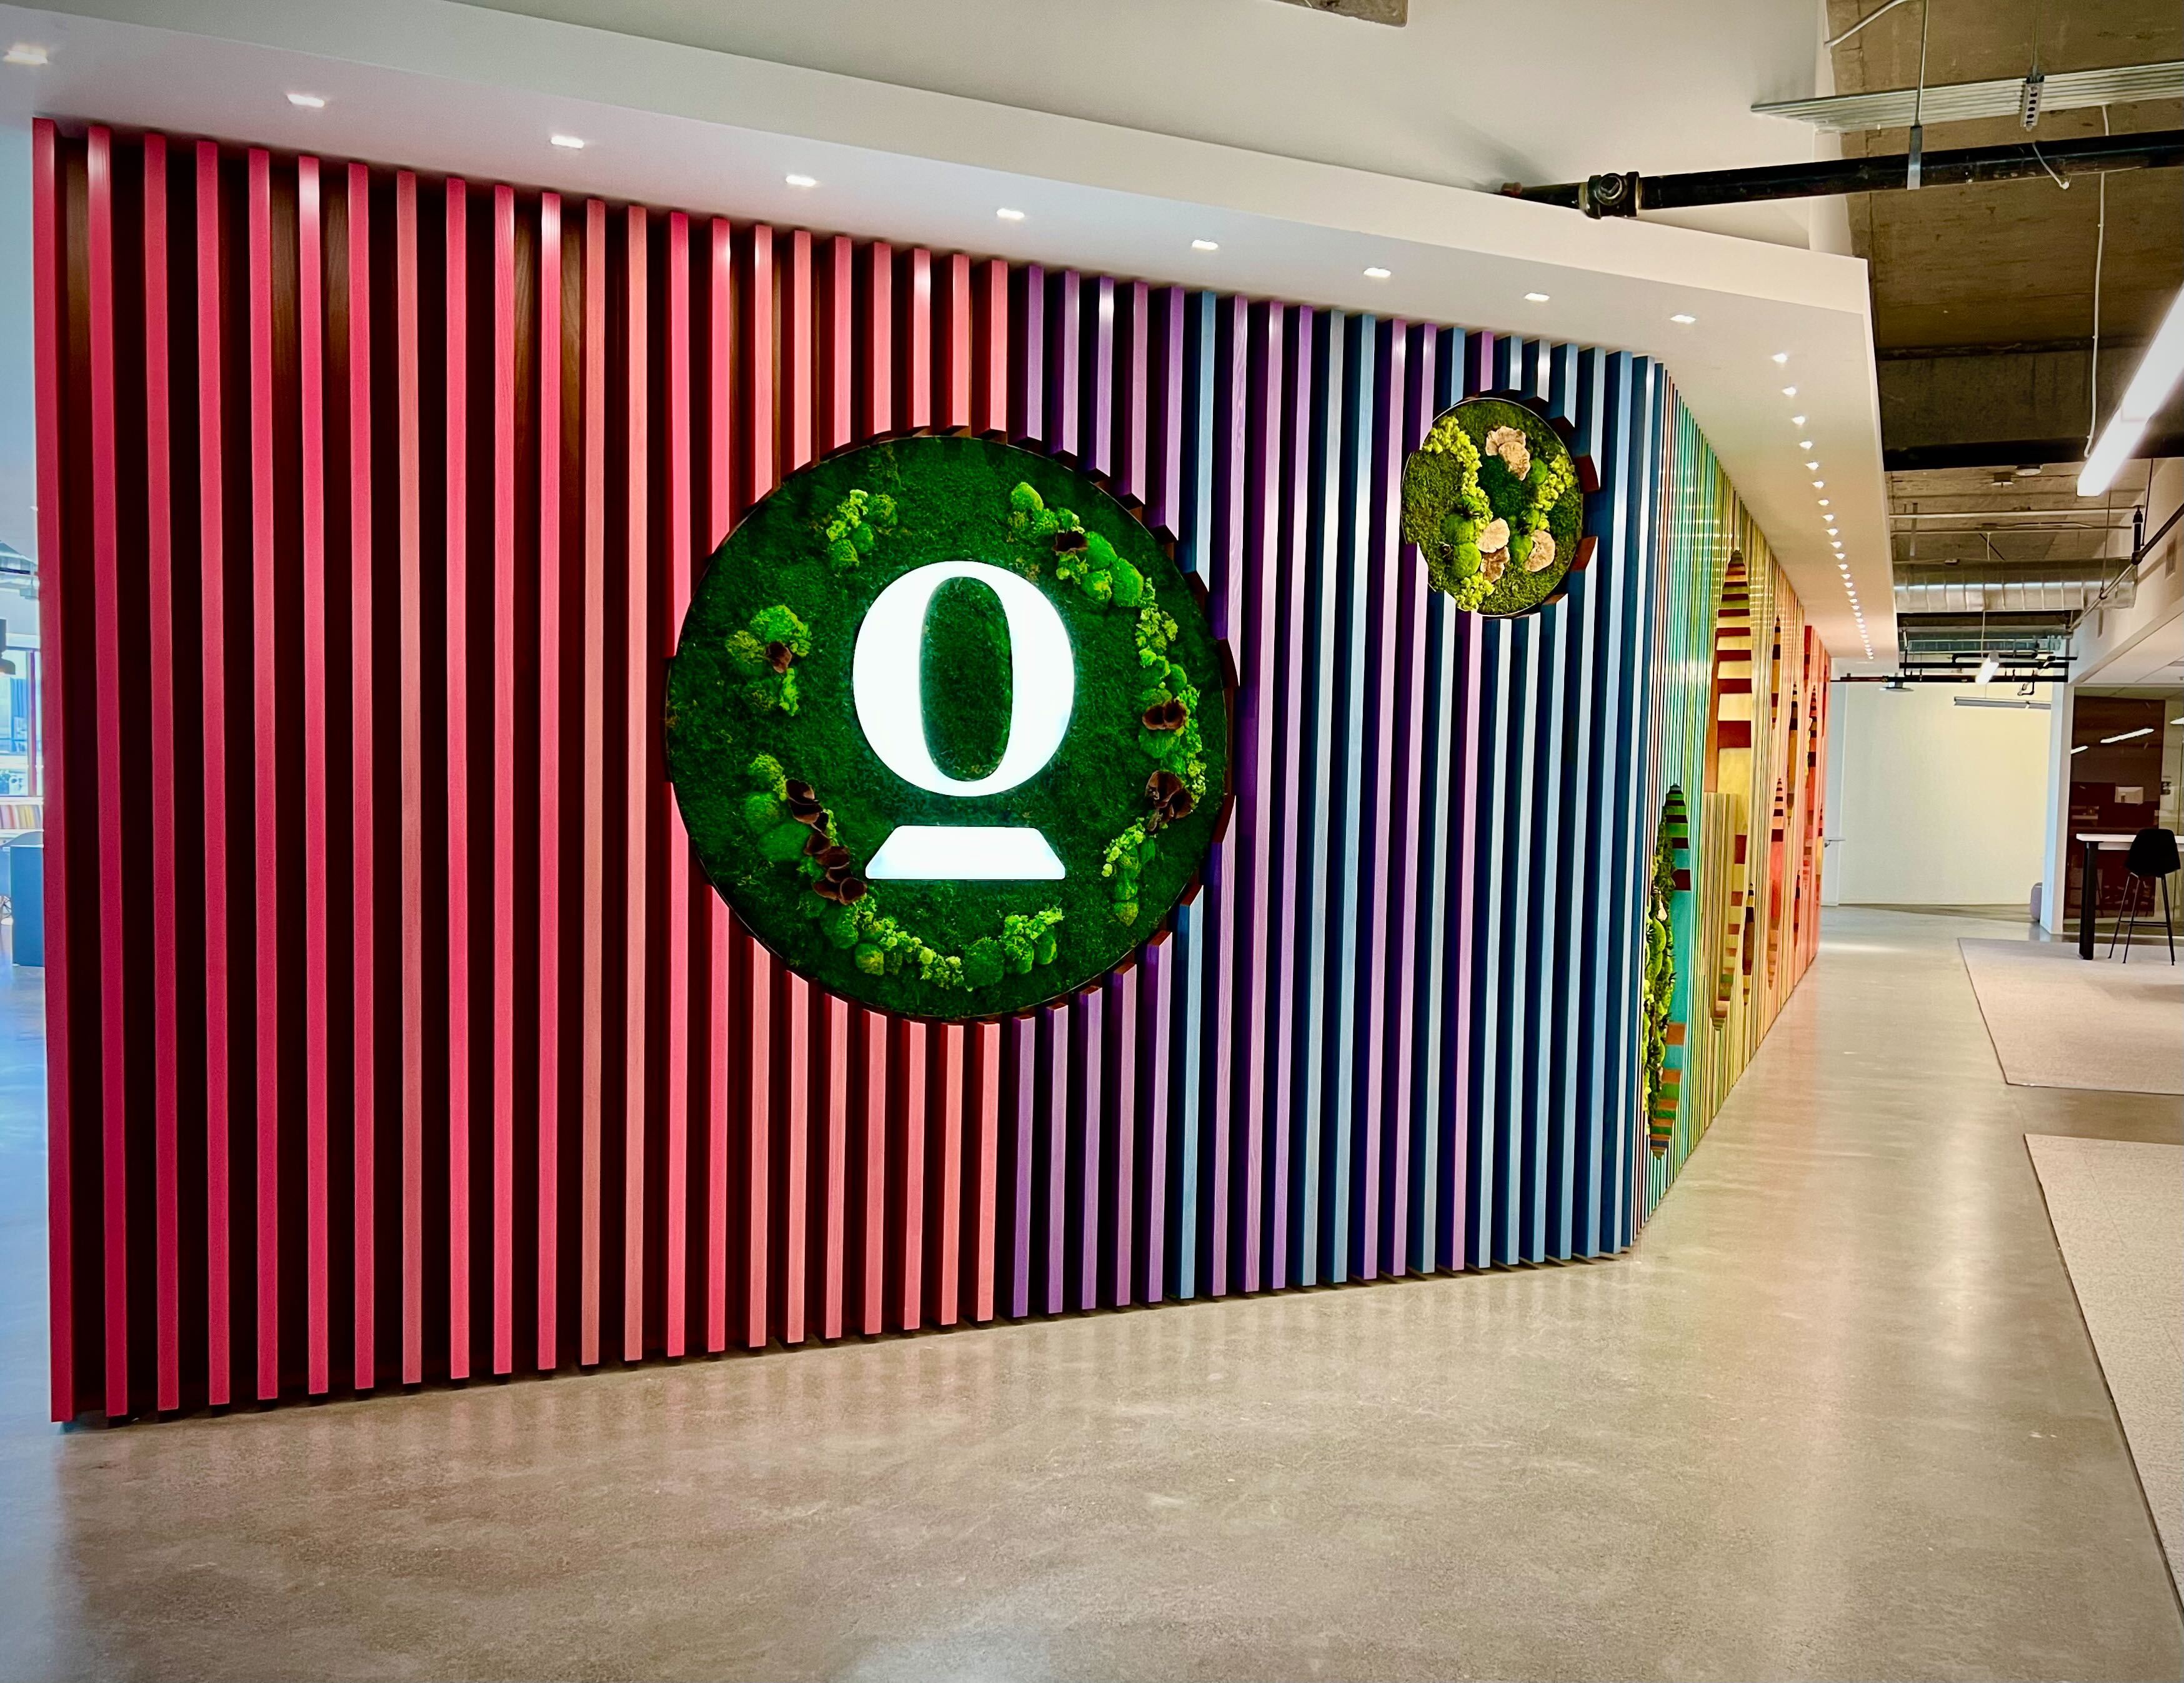 An image of a colorfully slatted logo wall at Opendoor’s offices. CAPTION: Opendoor